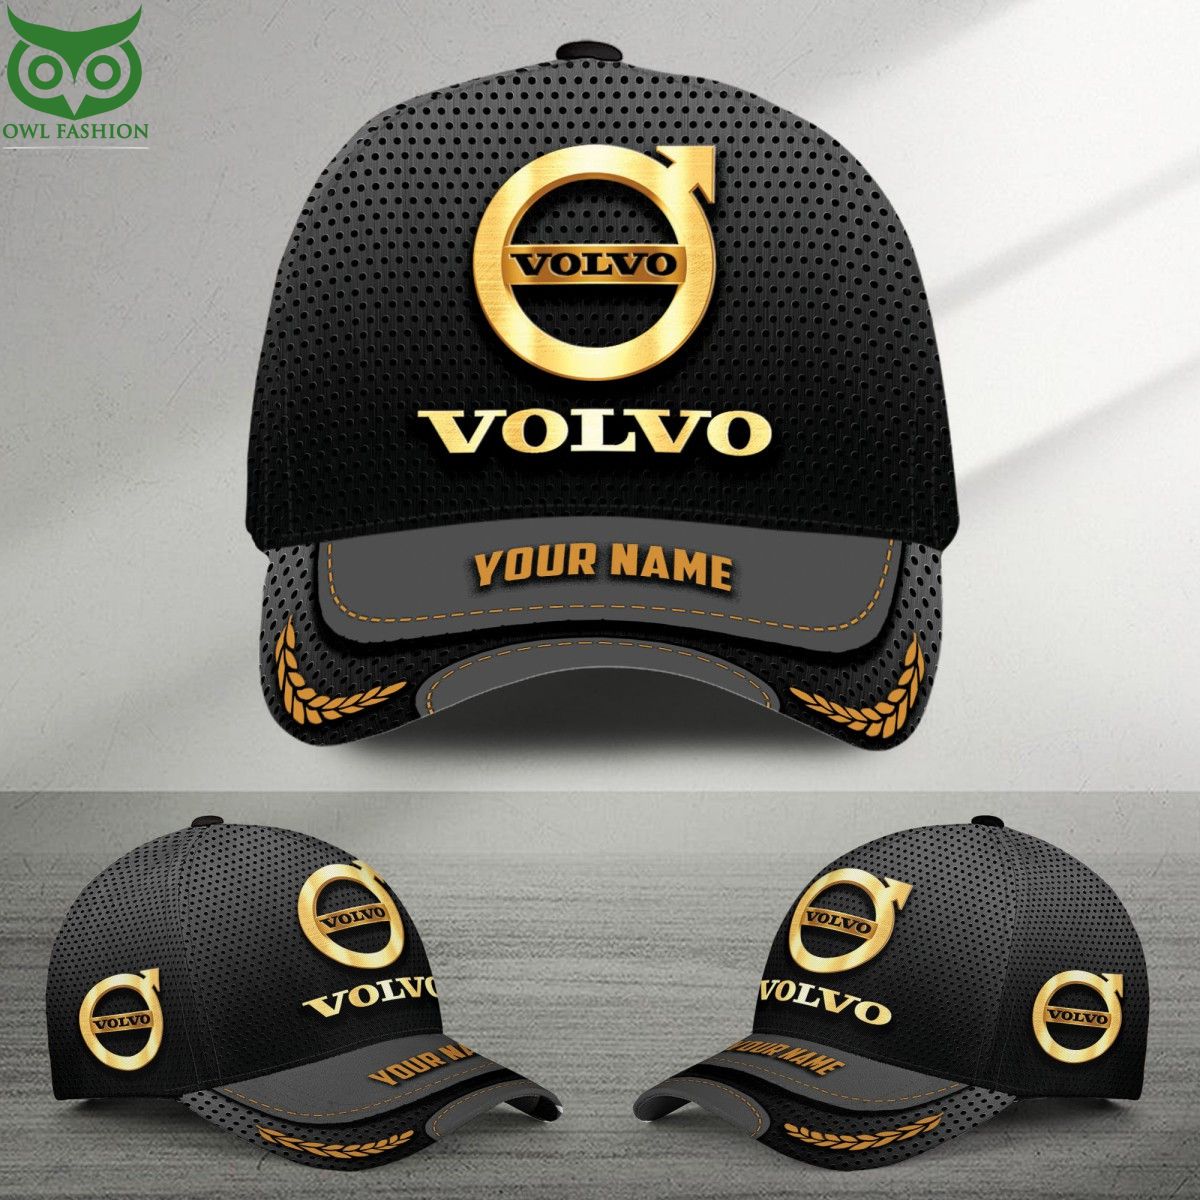 Volvo Luxury Car Brand Custom Classic Cap The use of space is excellent.